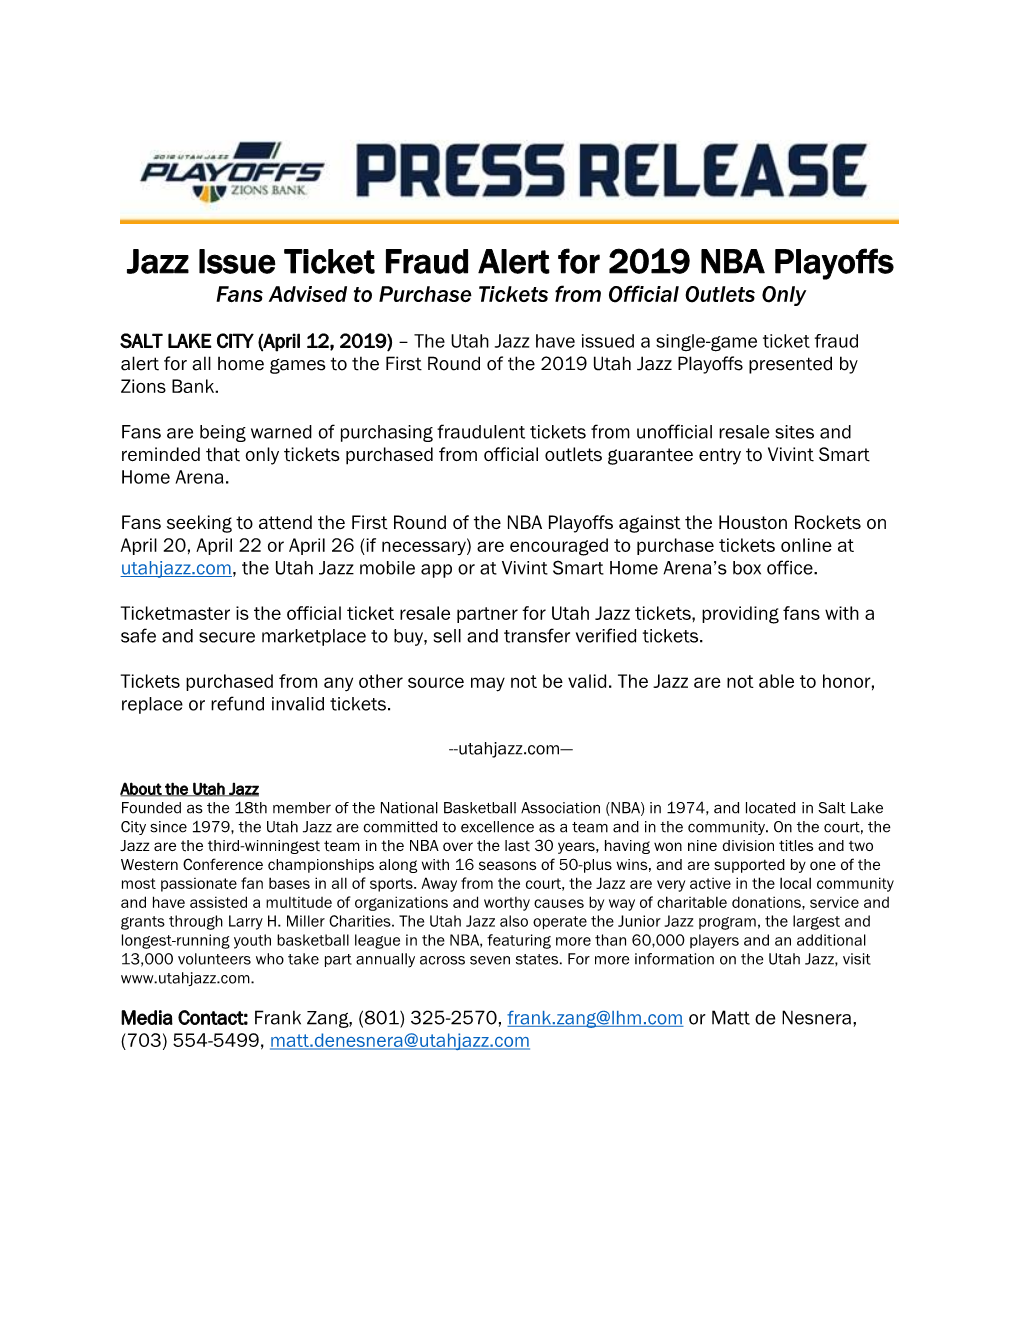 Jazz Issue Ticket Fraud Alert for 2019 NBA Playoffs Fans Advised to Purchase Tickets from Official Outlets Only